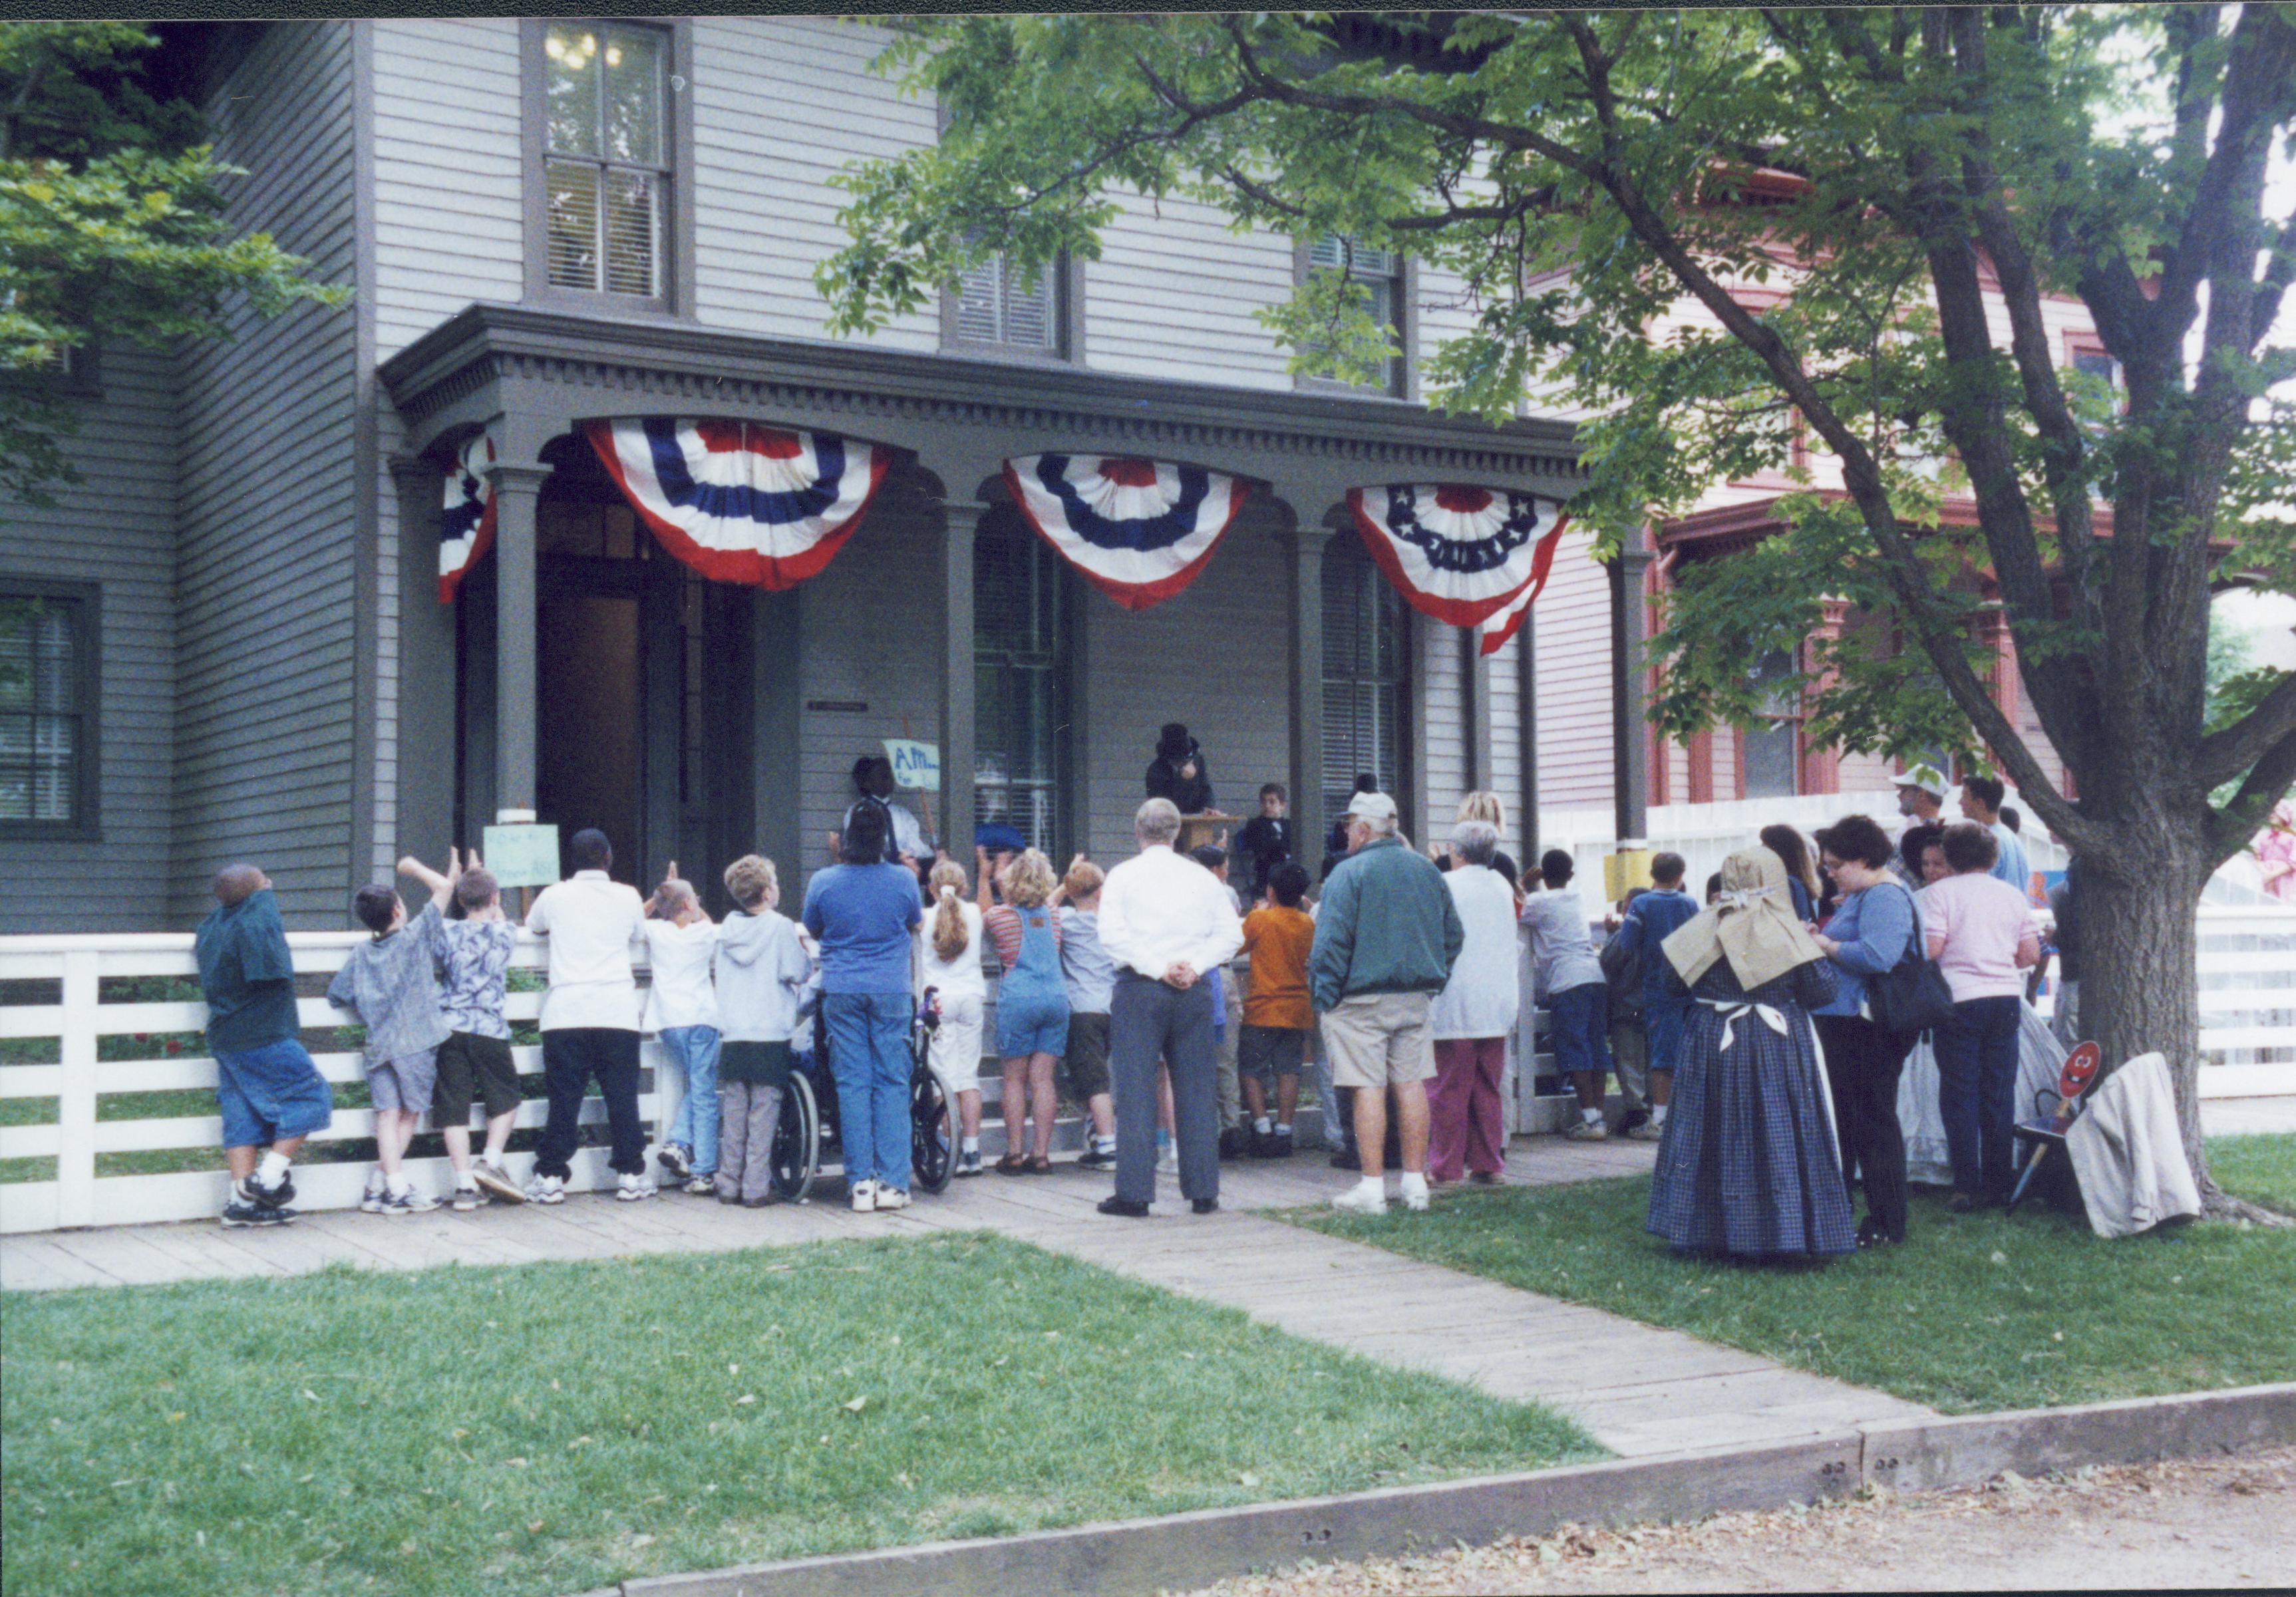 Iles School Living History program - Lincoln-Douglas debates performed by students on the Lyon House porch while school groups, parents, and teachers (in period clothing) watch.  Beedle House visible on right. Looking Northeast from 8th Street Iles School, living history, Lincoln-Douglas debates, students, school groups